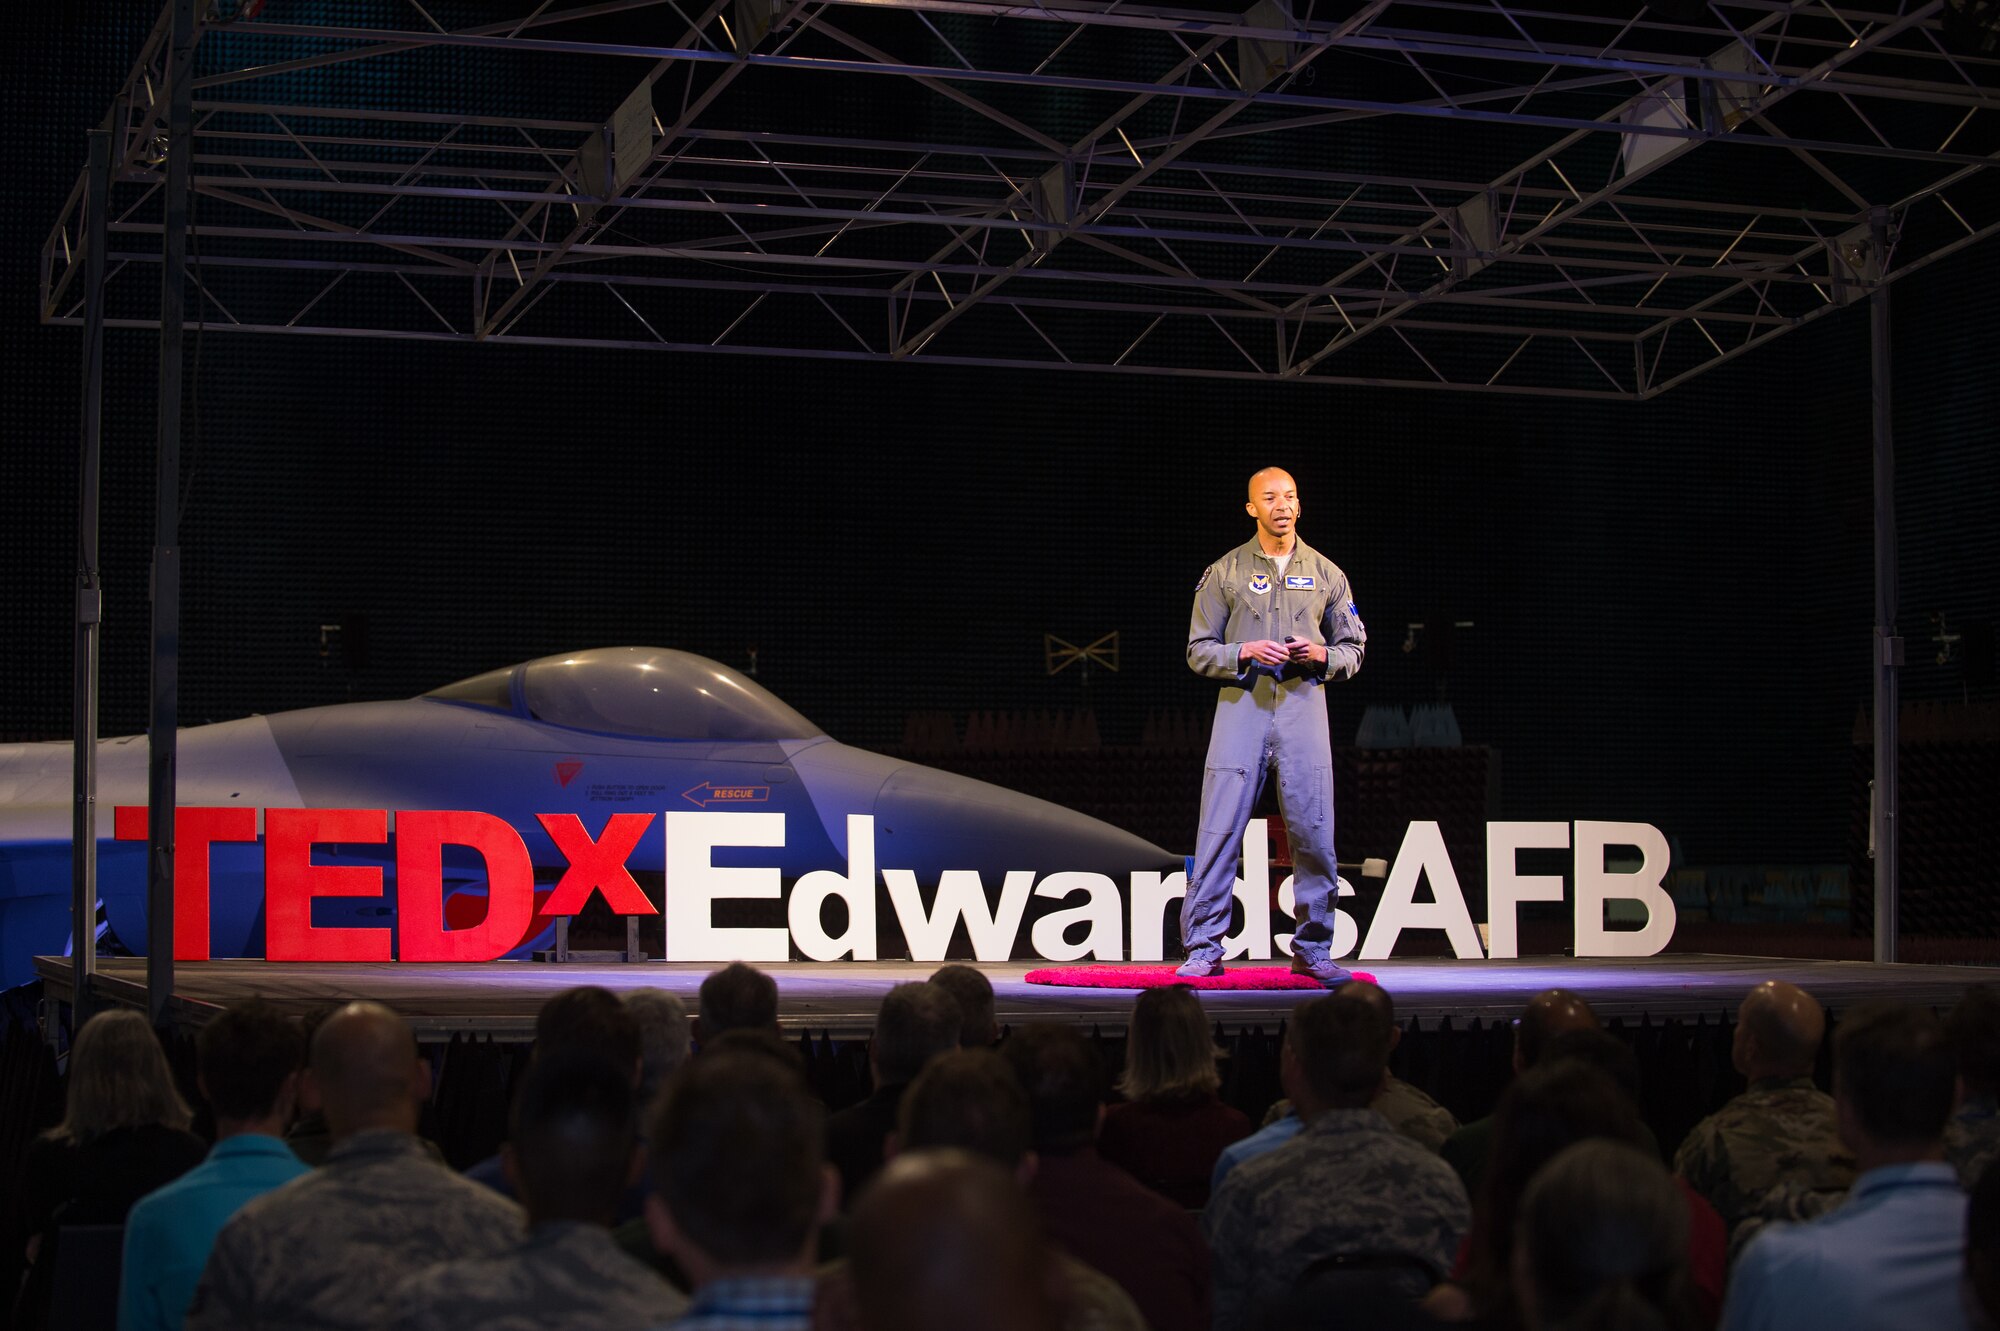 Col. Randy “Laz” Gordon, Lead for the Secretary of the Air Force’s AI Technology Accelerator, talks to guests during a presentation at the Edwards Air Force Base first-ever TEDx talks in the Benefield Anechoic Facility at Edwards AFB, California, Nov. 12. Gordon shared his experiences on innovation, implementation and breaking barriers while serving in the Air Force. Technology, Entertainment, and Design (TED) is a nonpartisan nonprofit devoted to spreading ideas, usually in the form of short, powerful talks. Meanwhile, TEDx events are organized independently under a free license granted by TED, according to the TED website. (Air Force photo by Richard Gonzales)